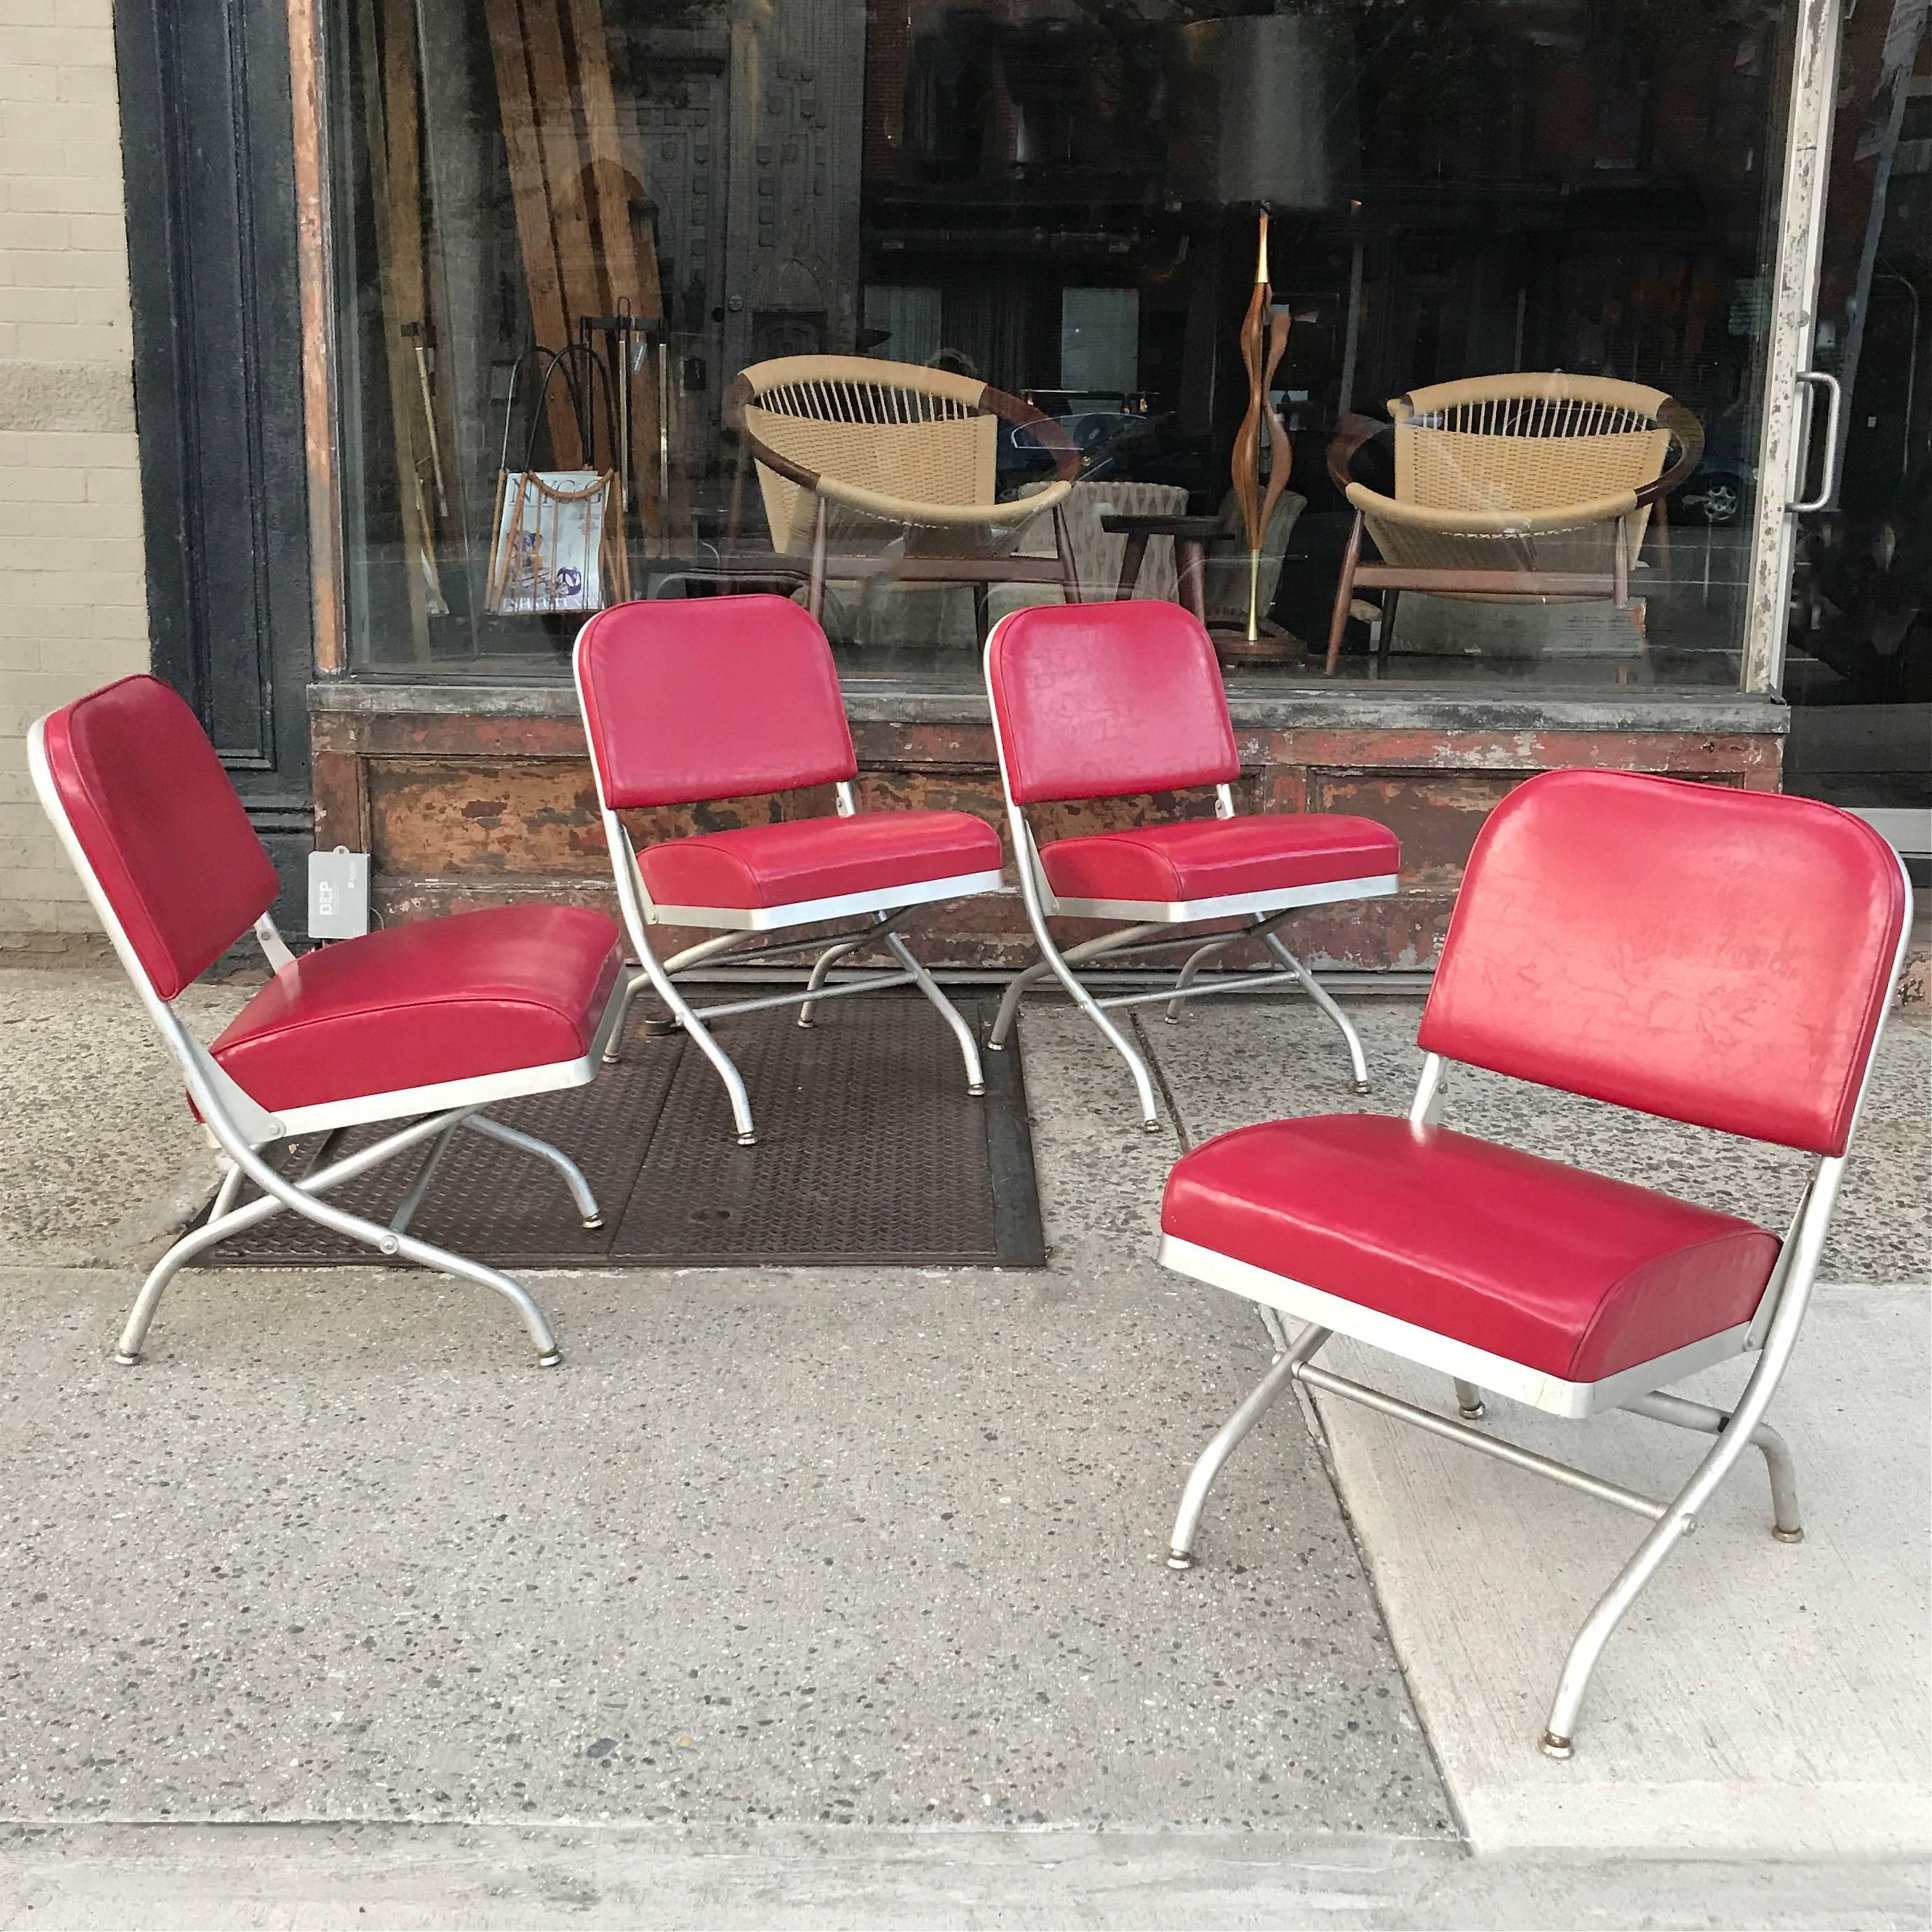 Set of four, mid century, machine age, folding, theater side chairs by Warren McArthur with brushed aluminum frames and lipstick red vinyl upholstery.